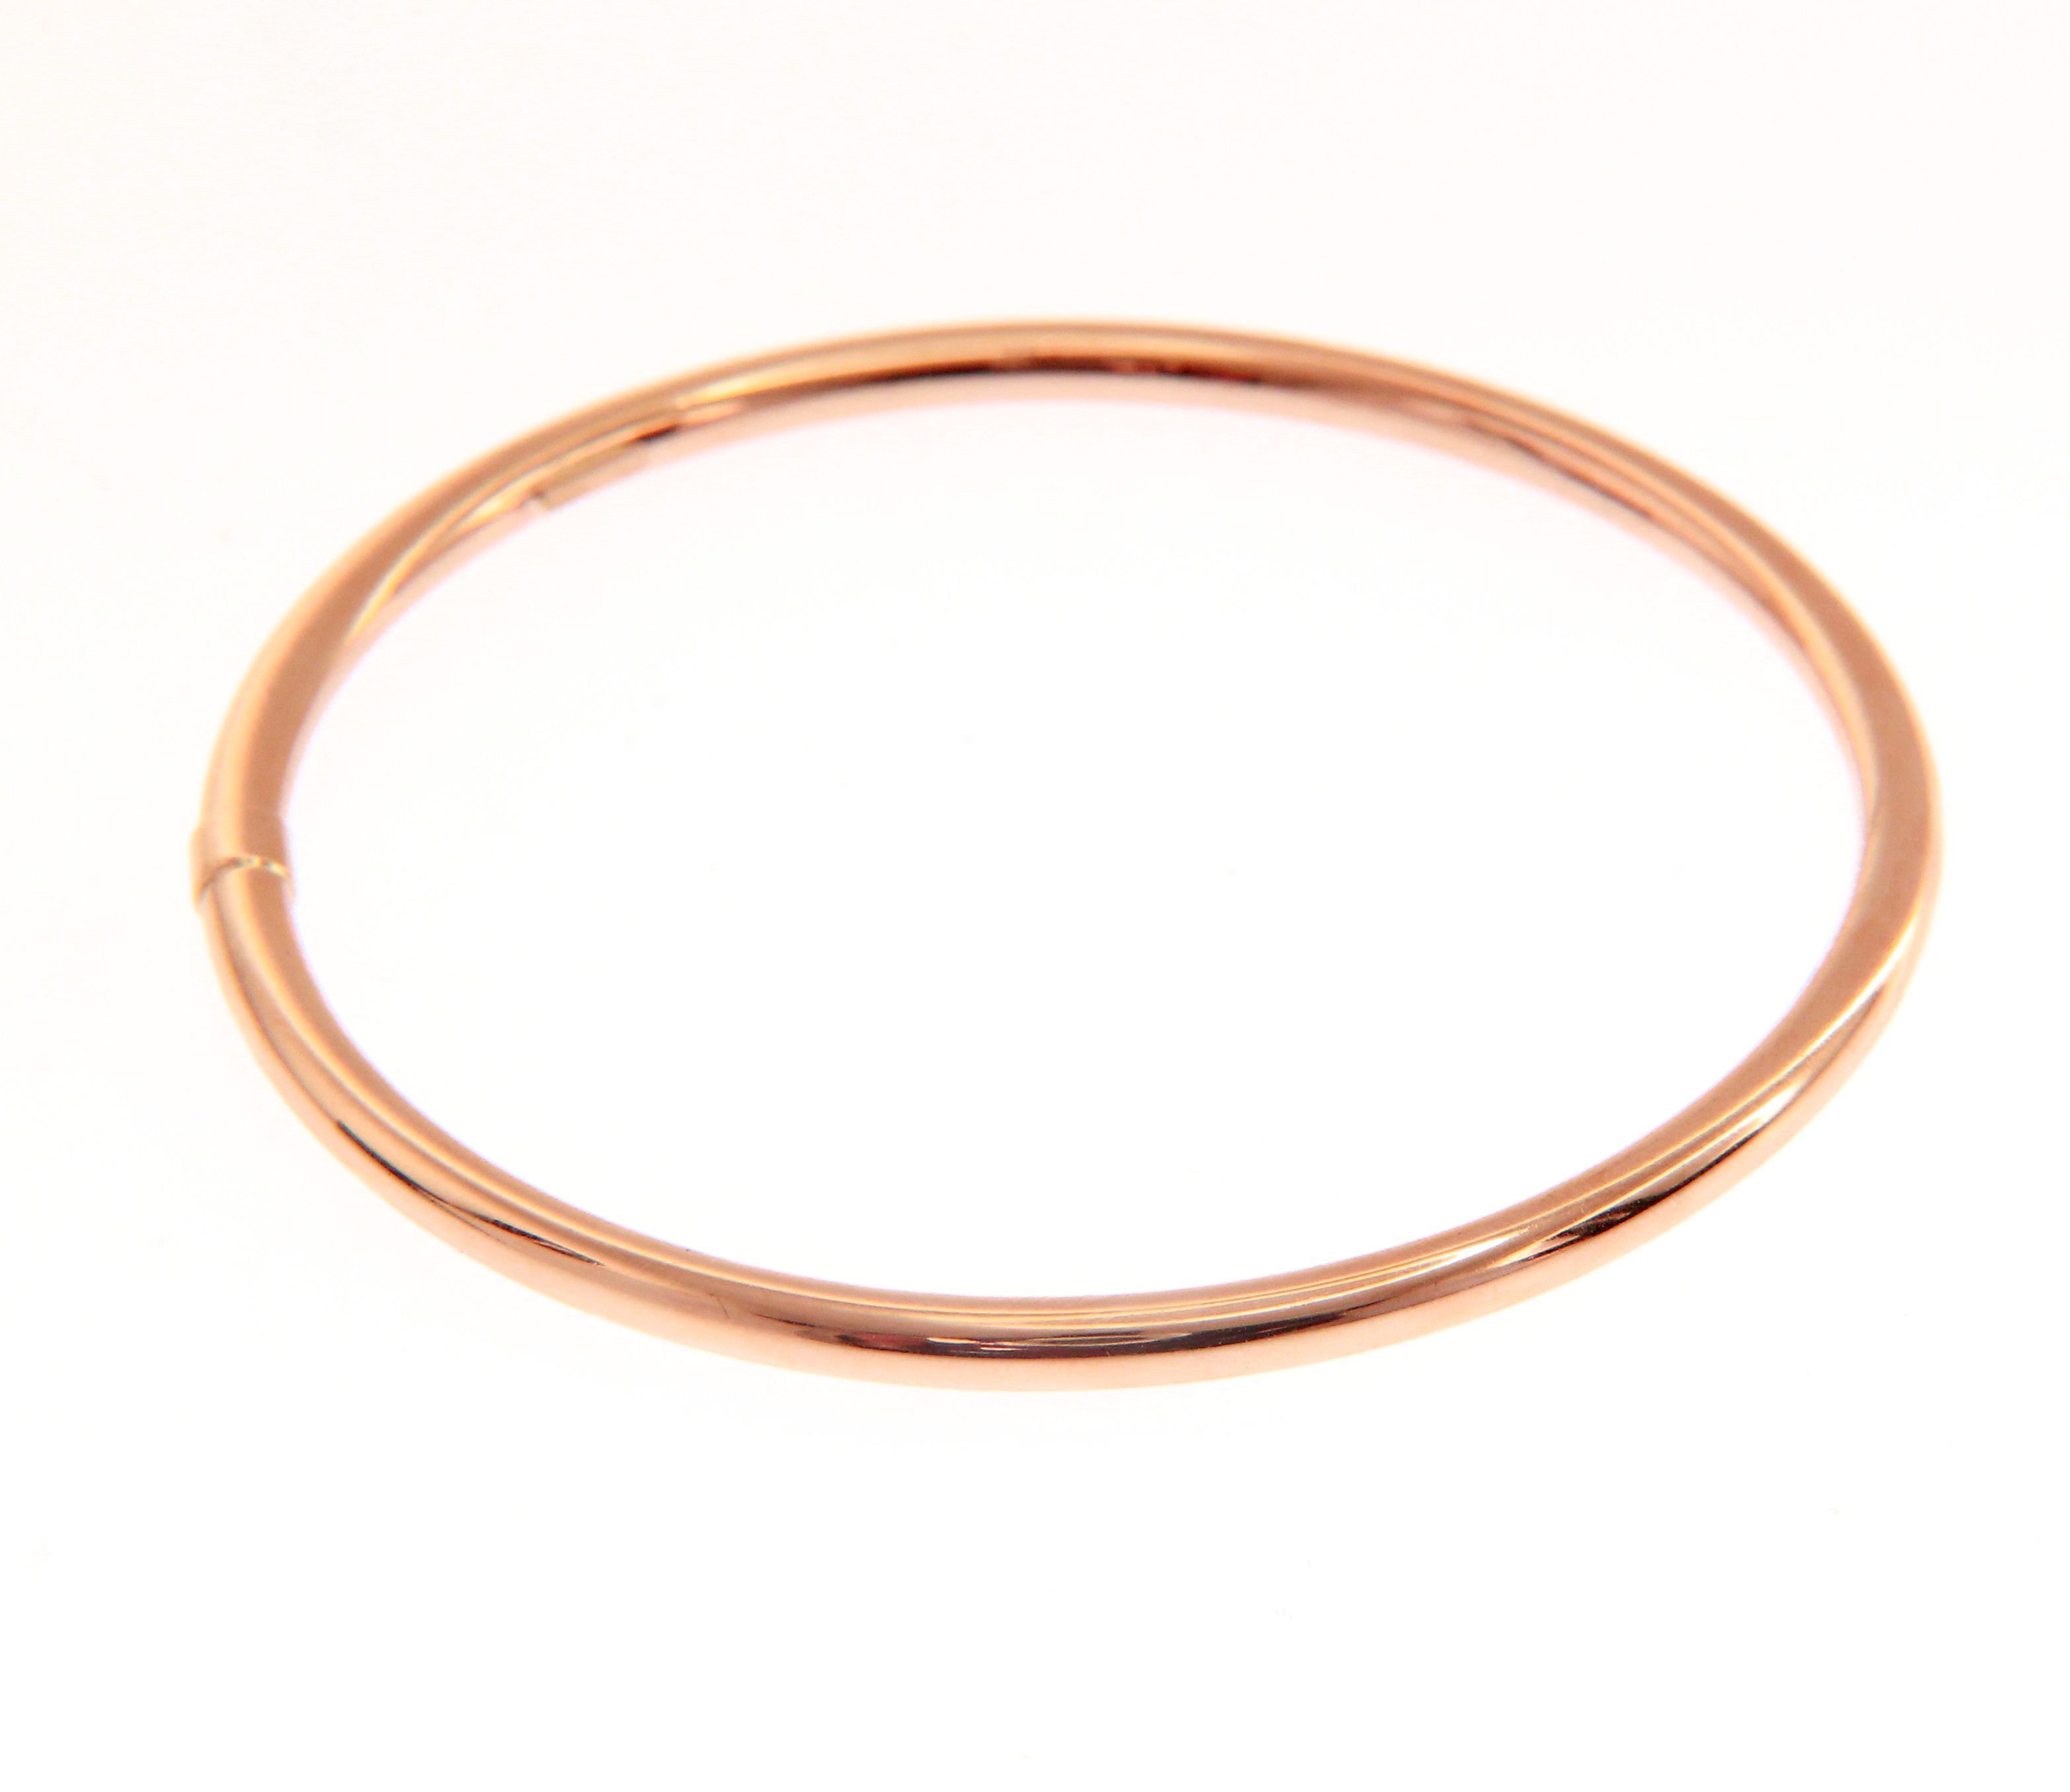 Rose gold oval bracelet with clasp k14 (code S201309)